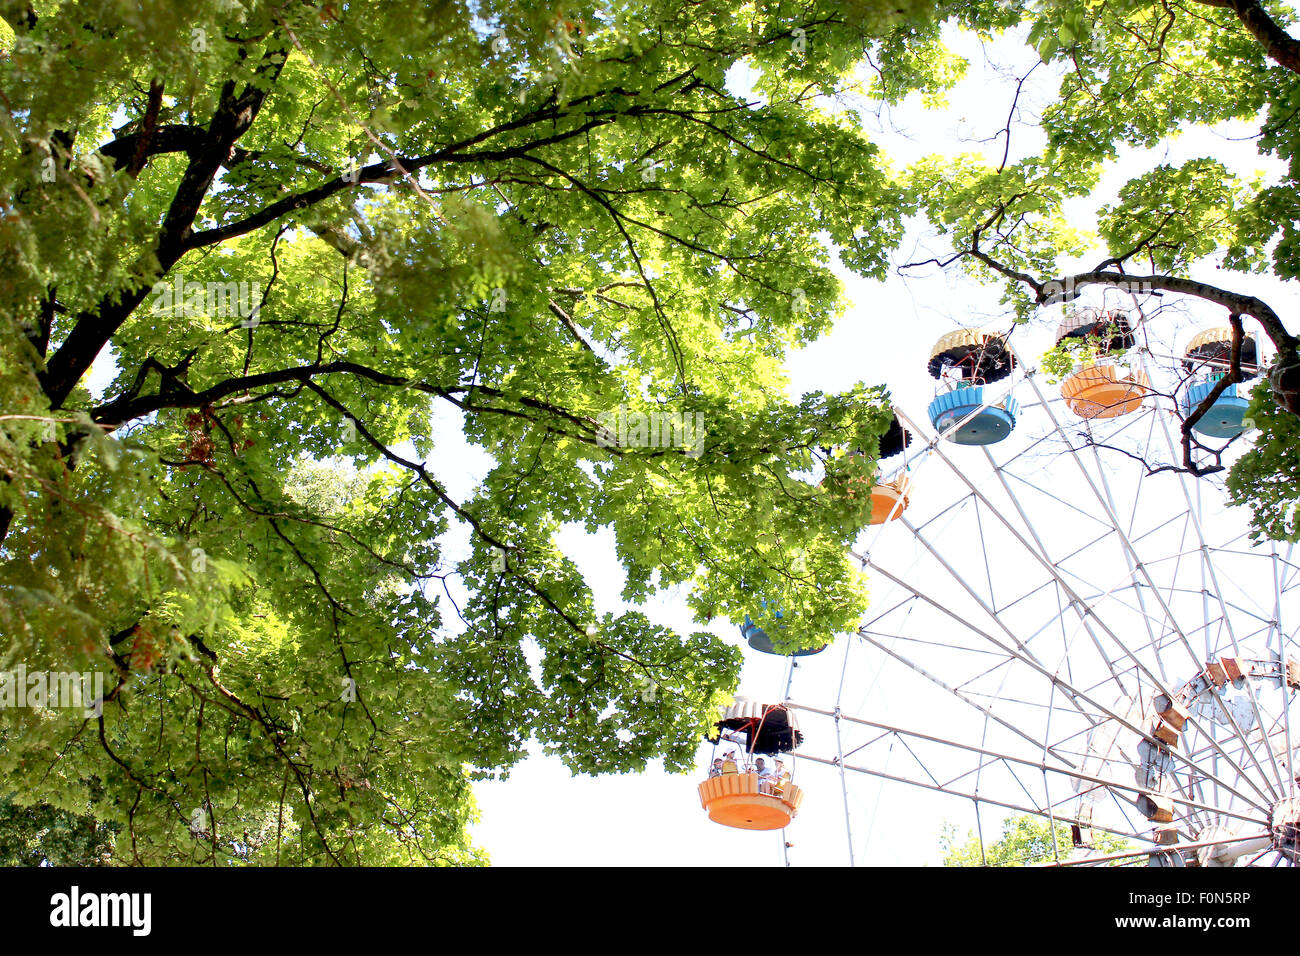 ferris wheel in the park with trees Stock Photo